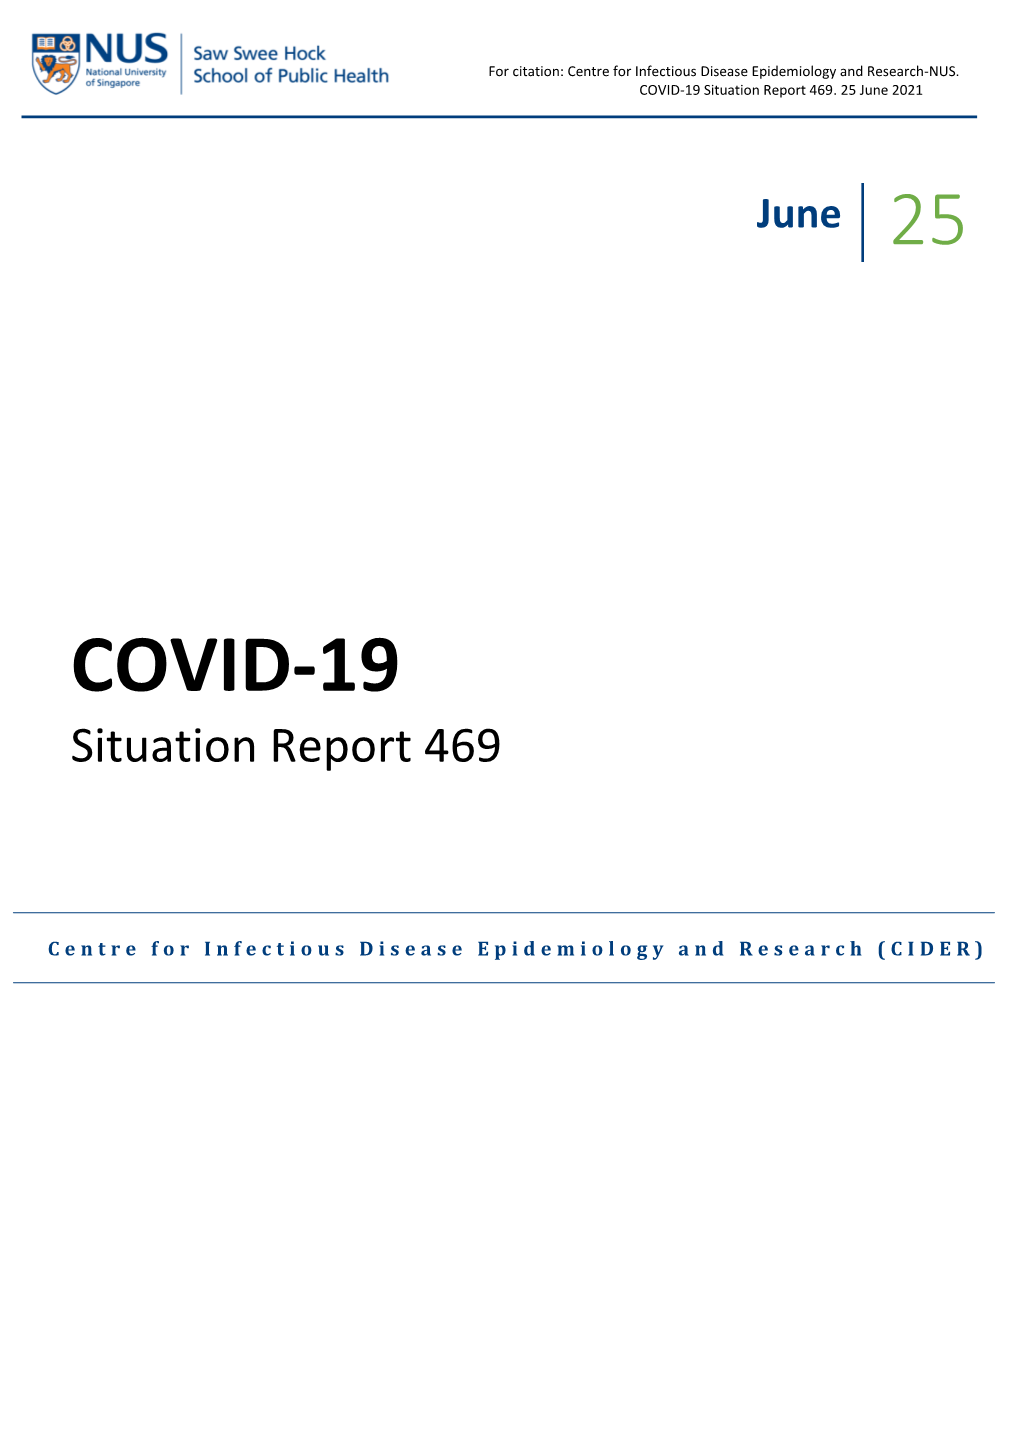 COVID-19 Situation Report 469